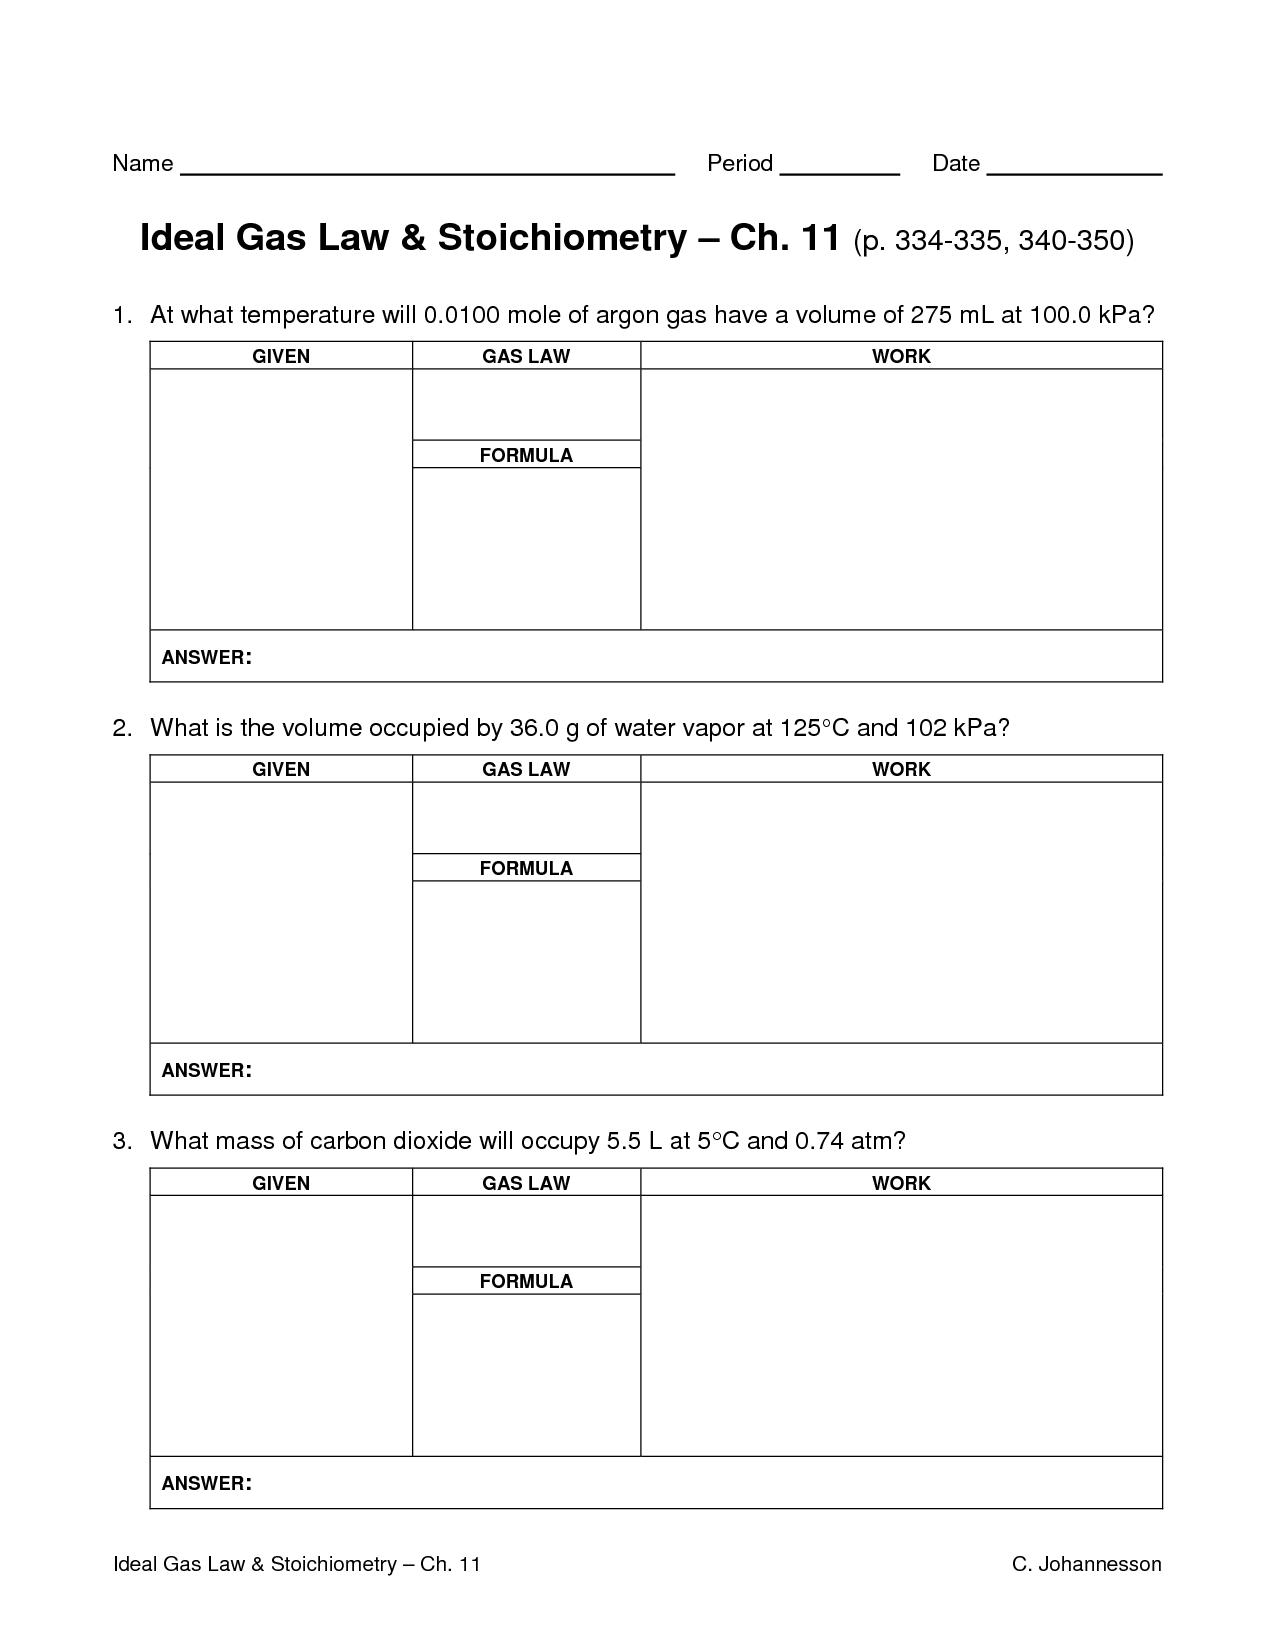 Ideal Gas Law Worksheet Image